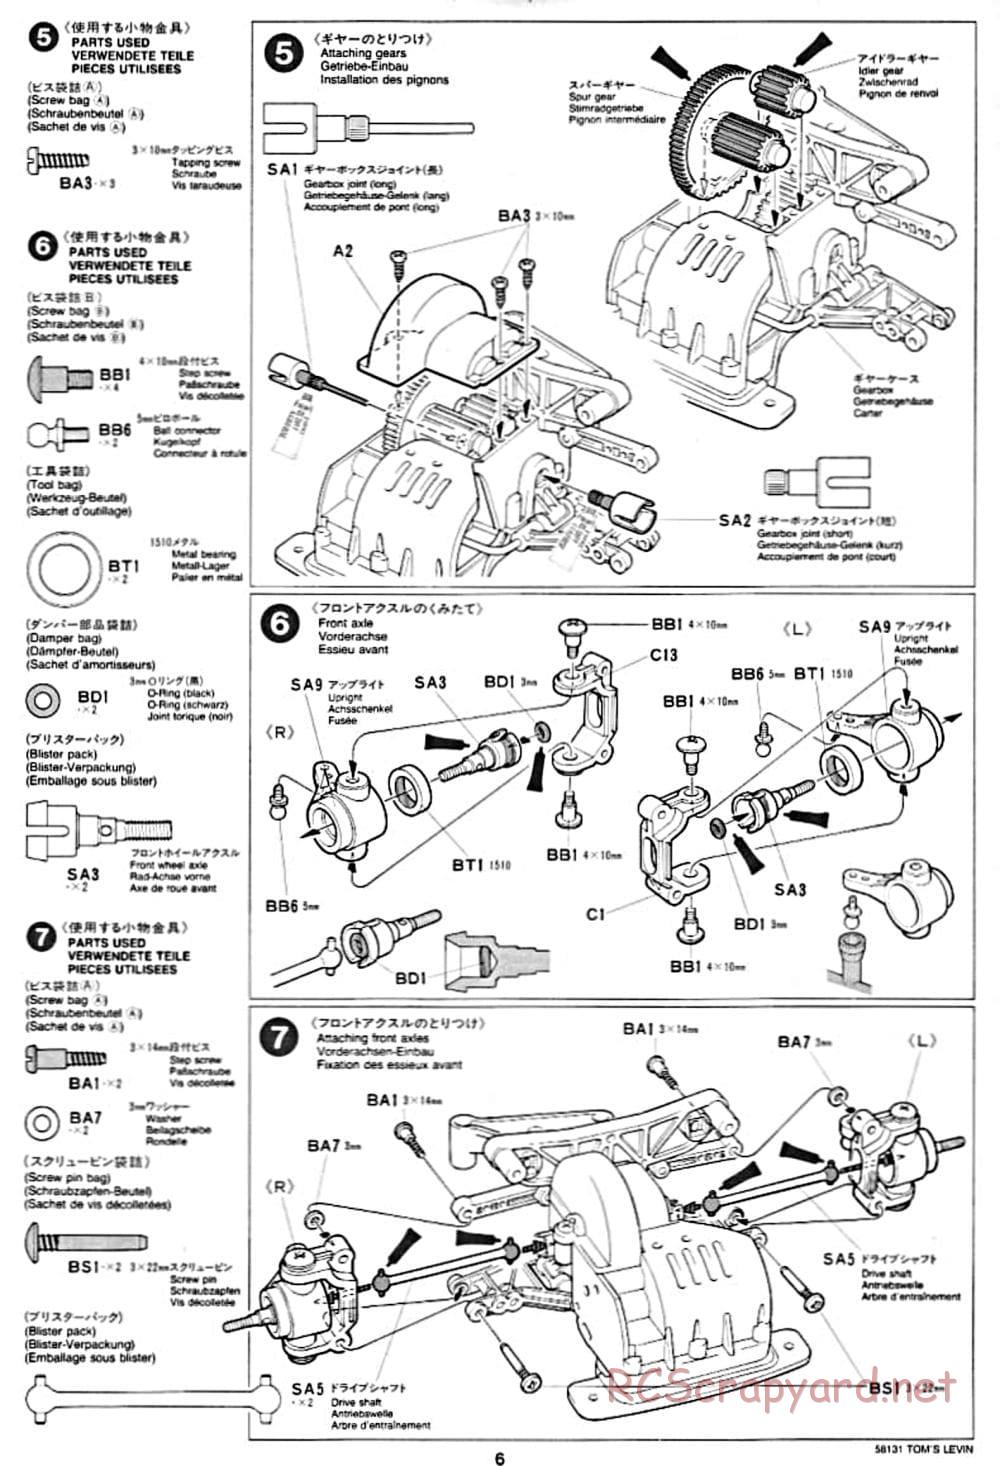 Tamiya - Toyota Tom's Levin - FF-01 Chassis - Manual - Page 6